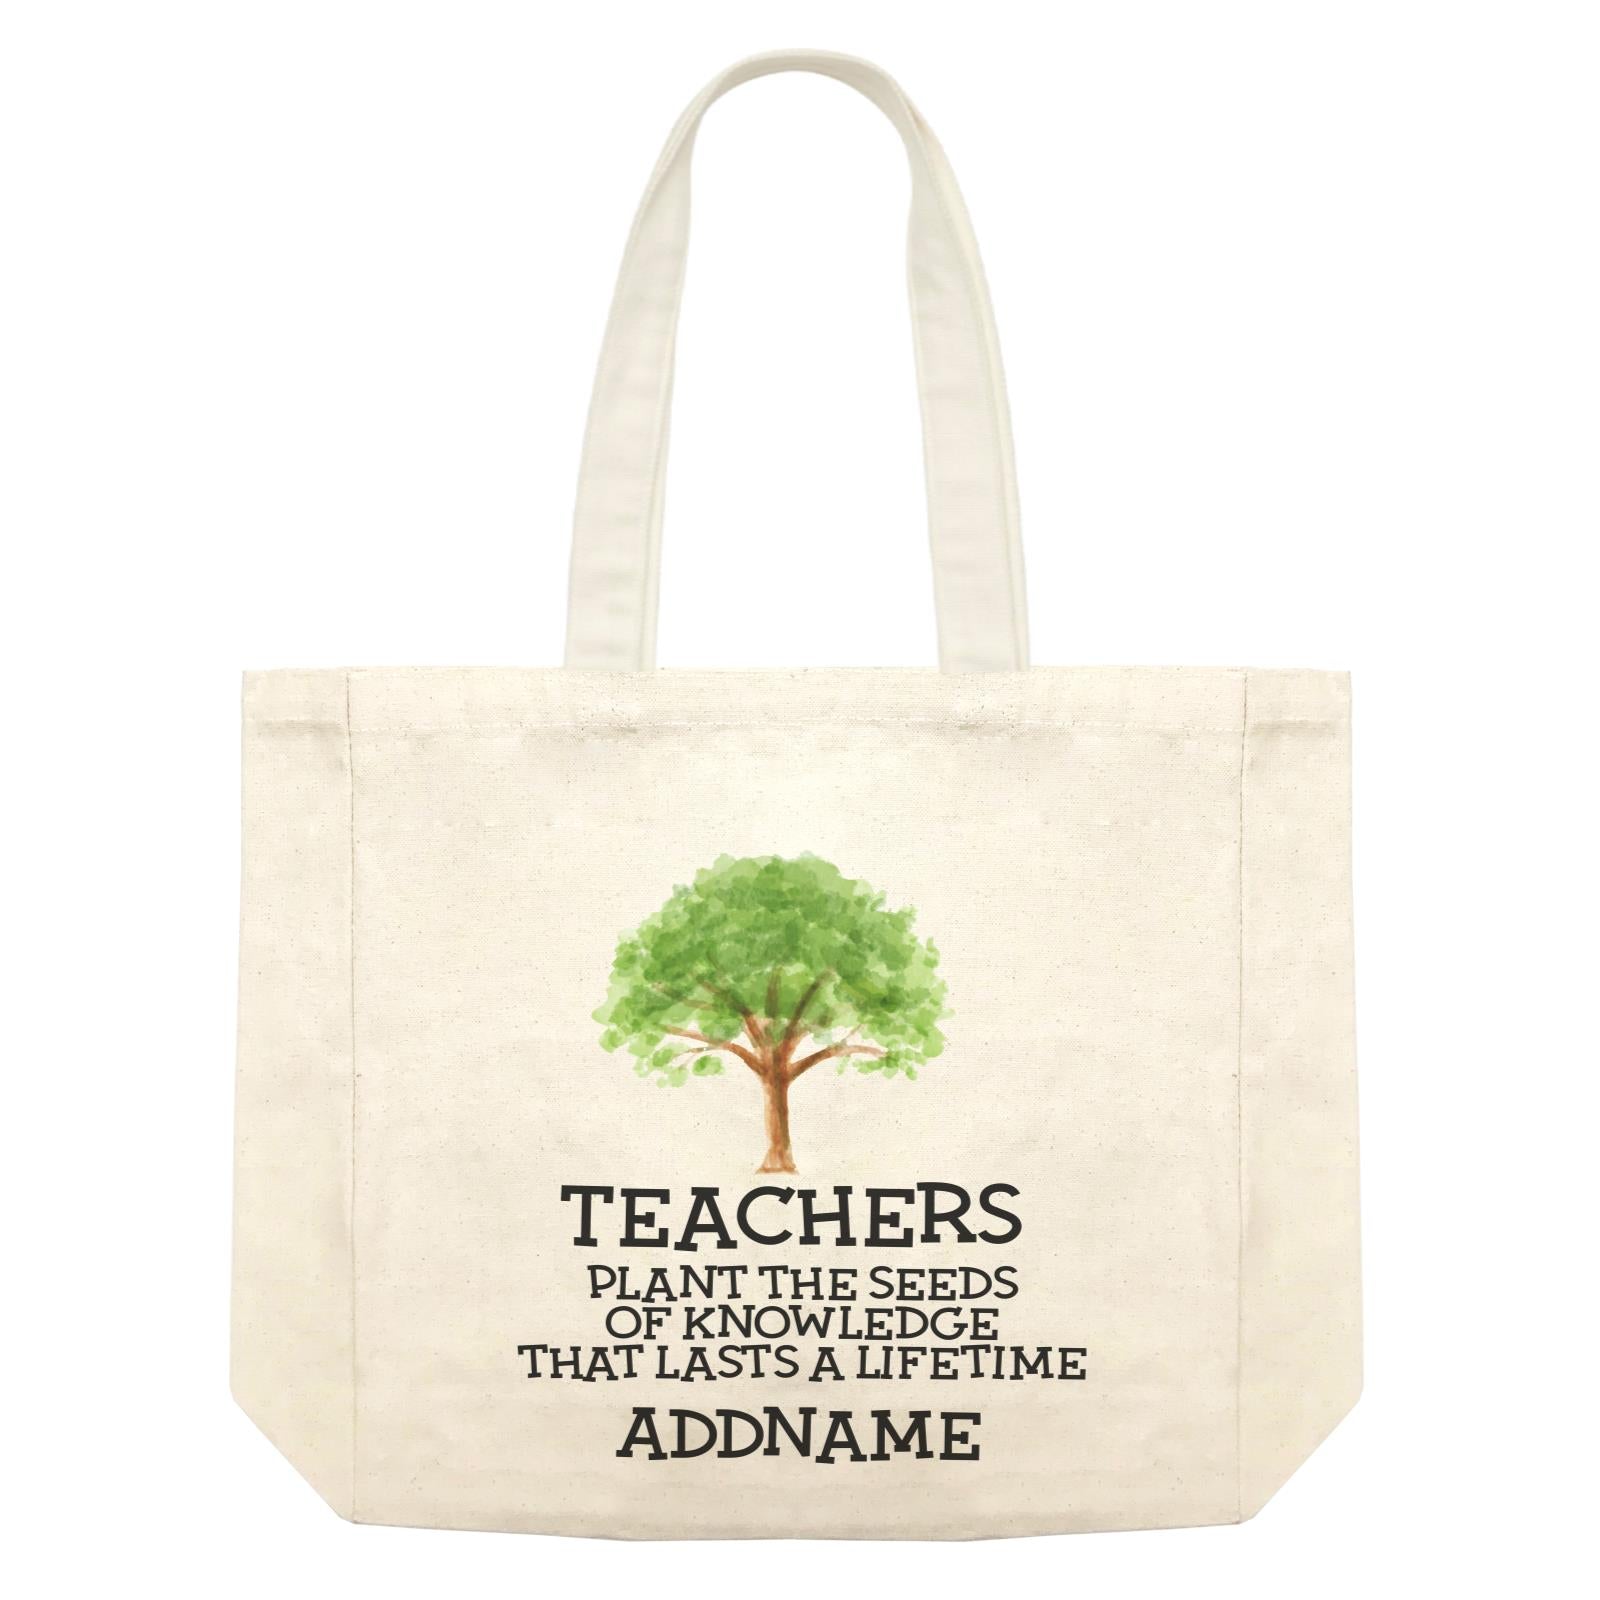 Teacher Quotes 2 Teachers Plant The Seeds Of Knowledge That Lasts A Lifetime Addname Shopping Bag